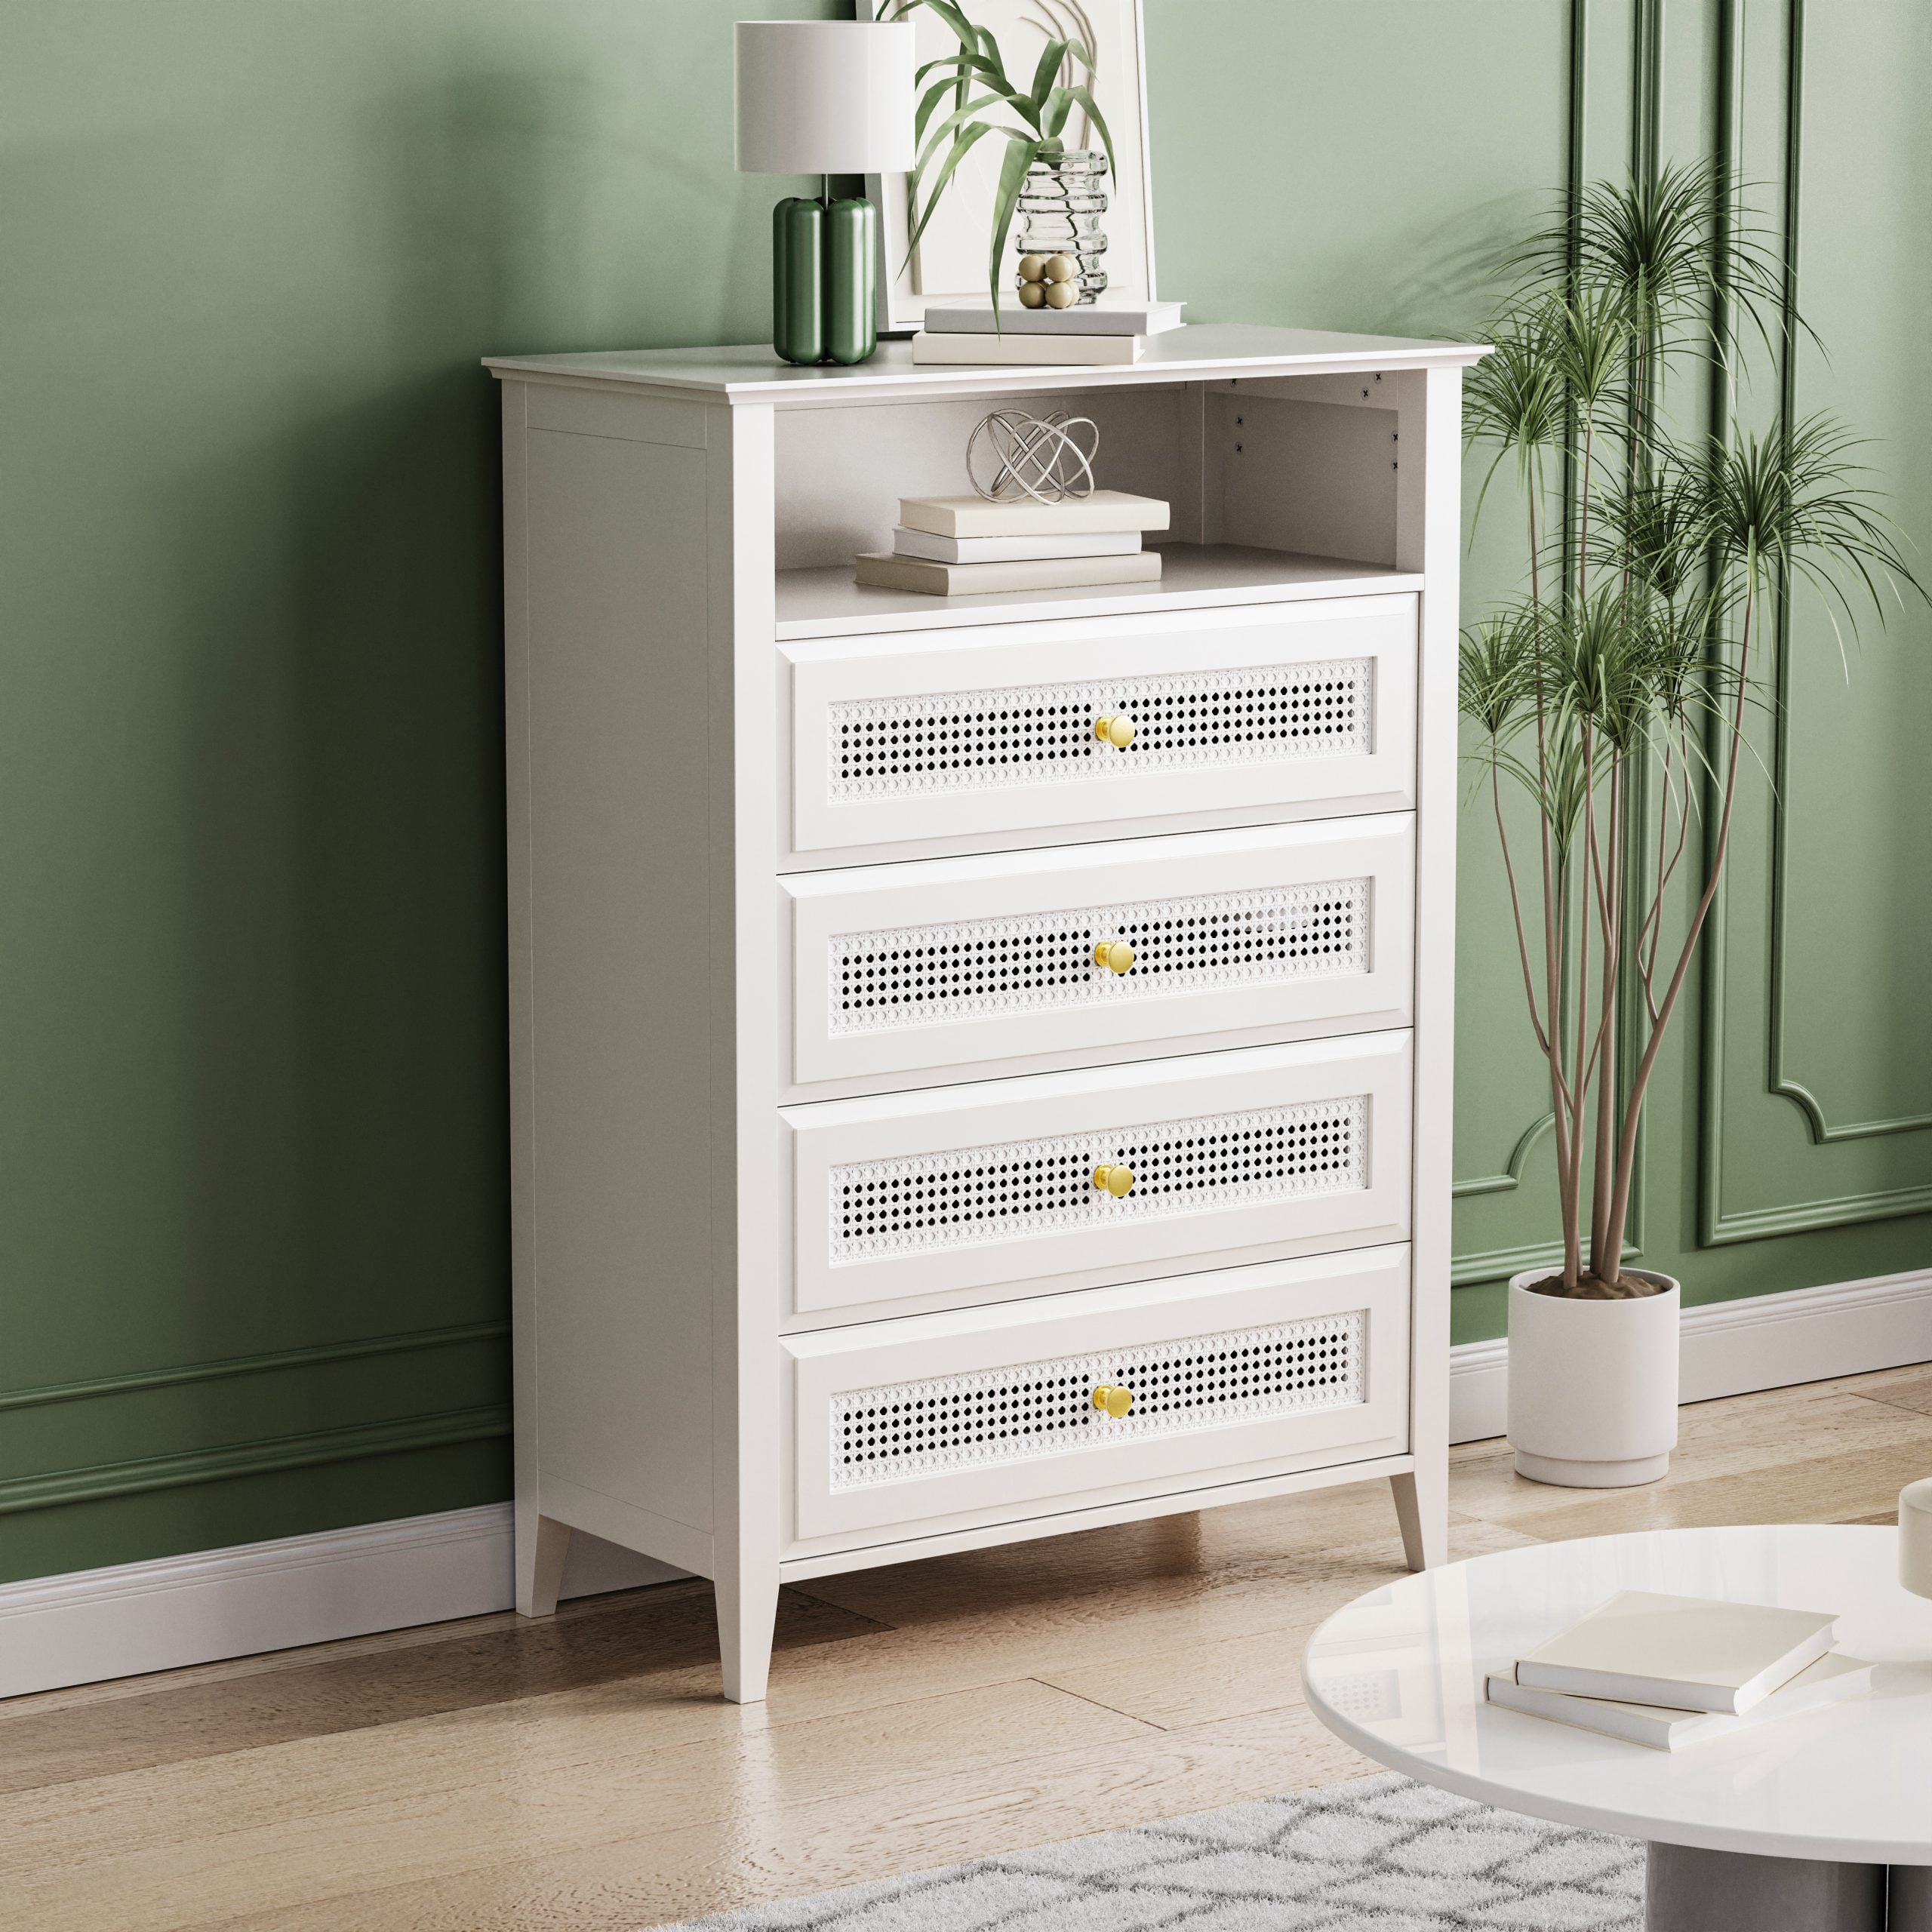 Retro Style Chest Of Drawers With Rattan Panels - WF303857AAK